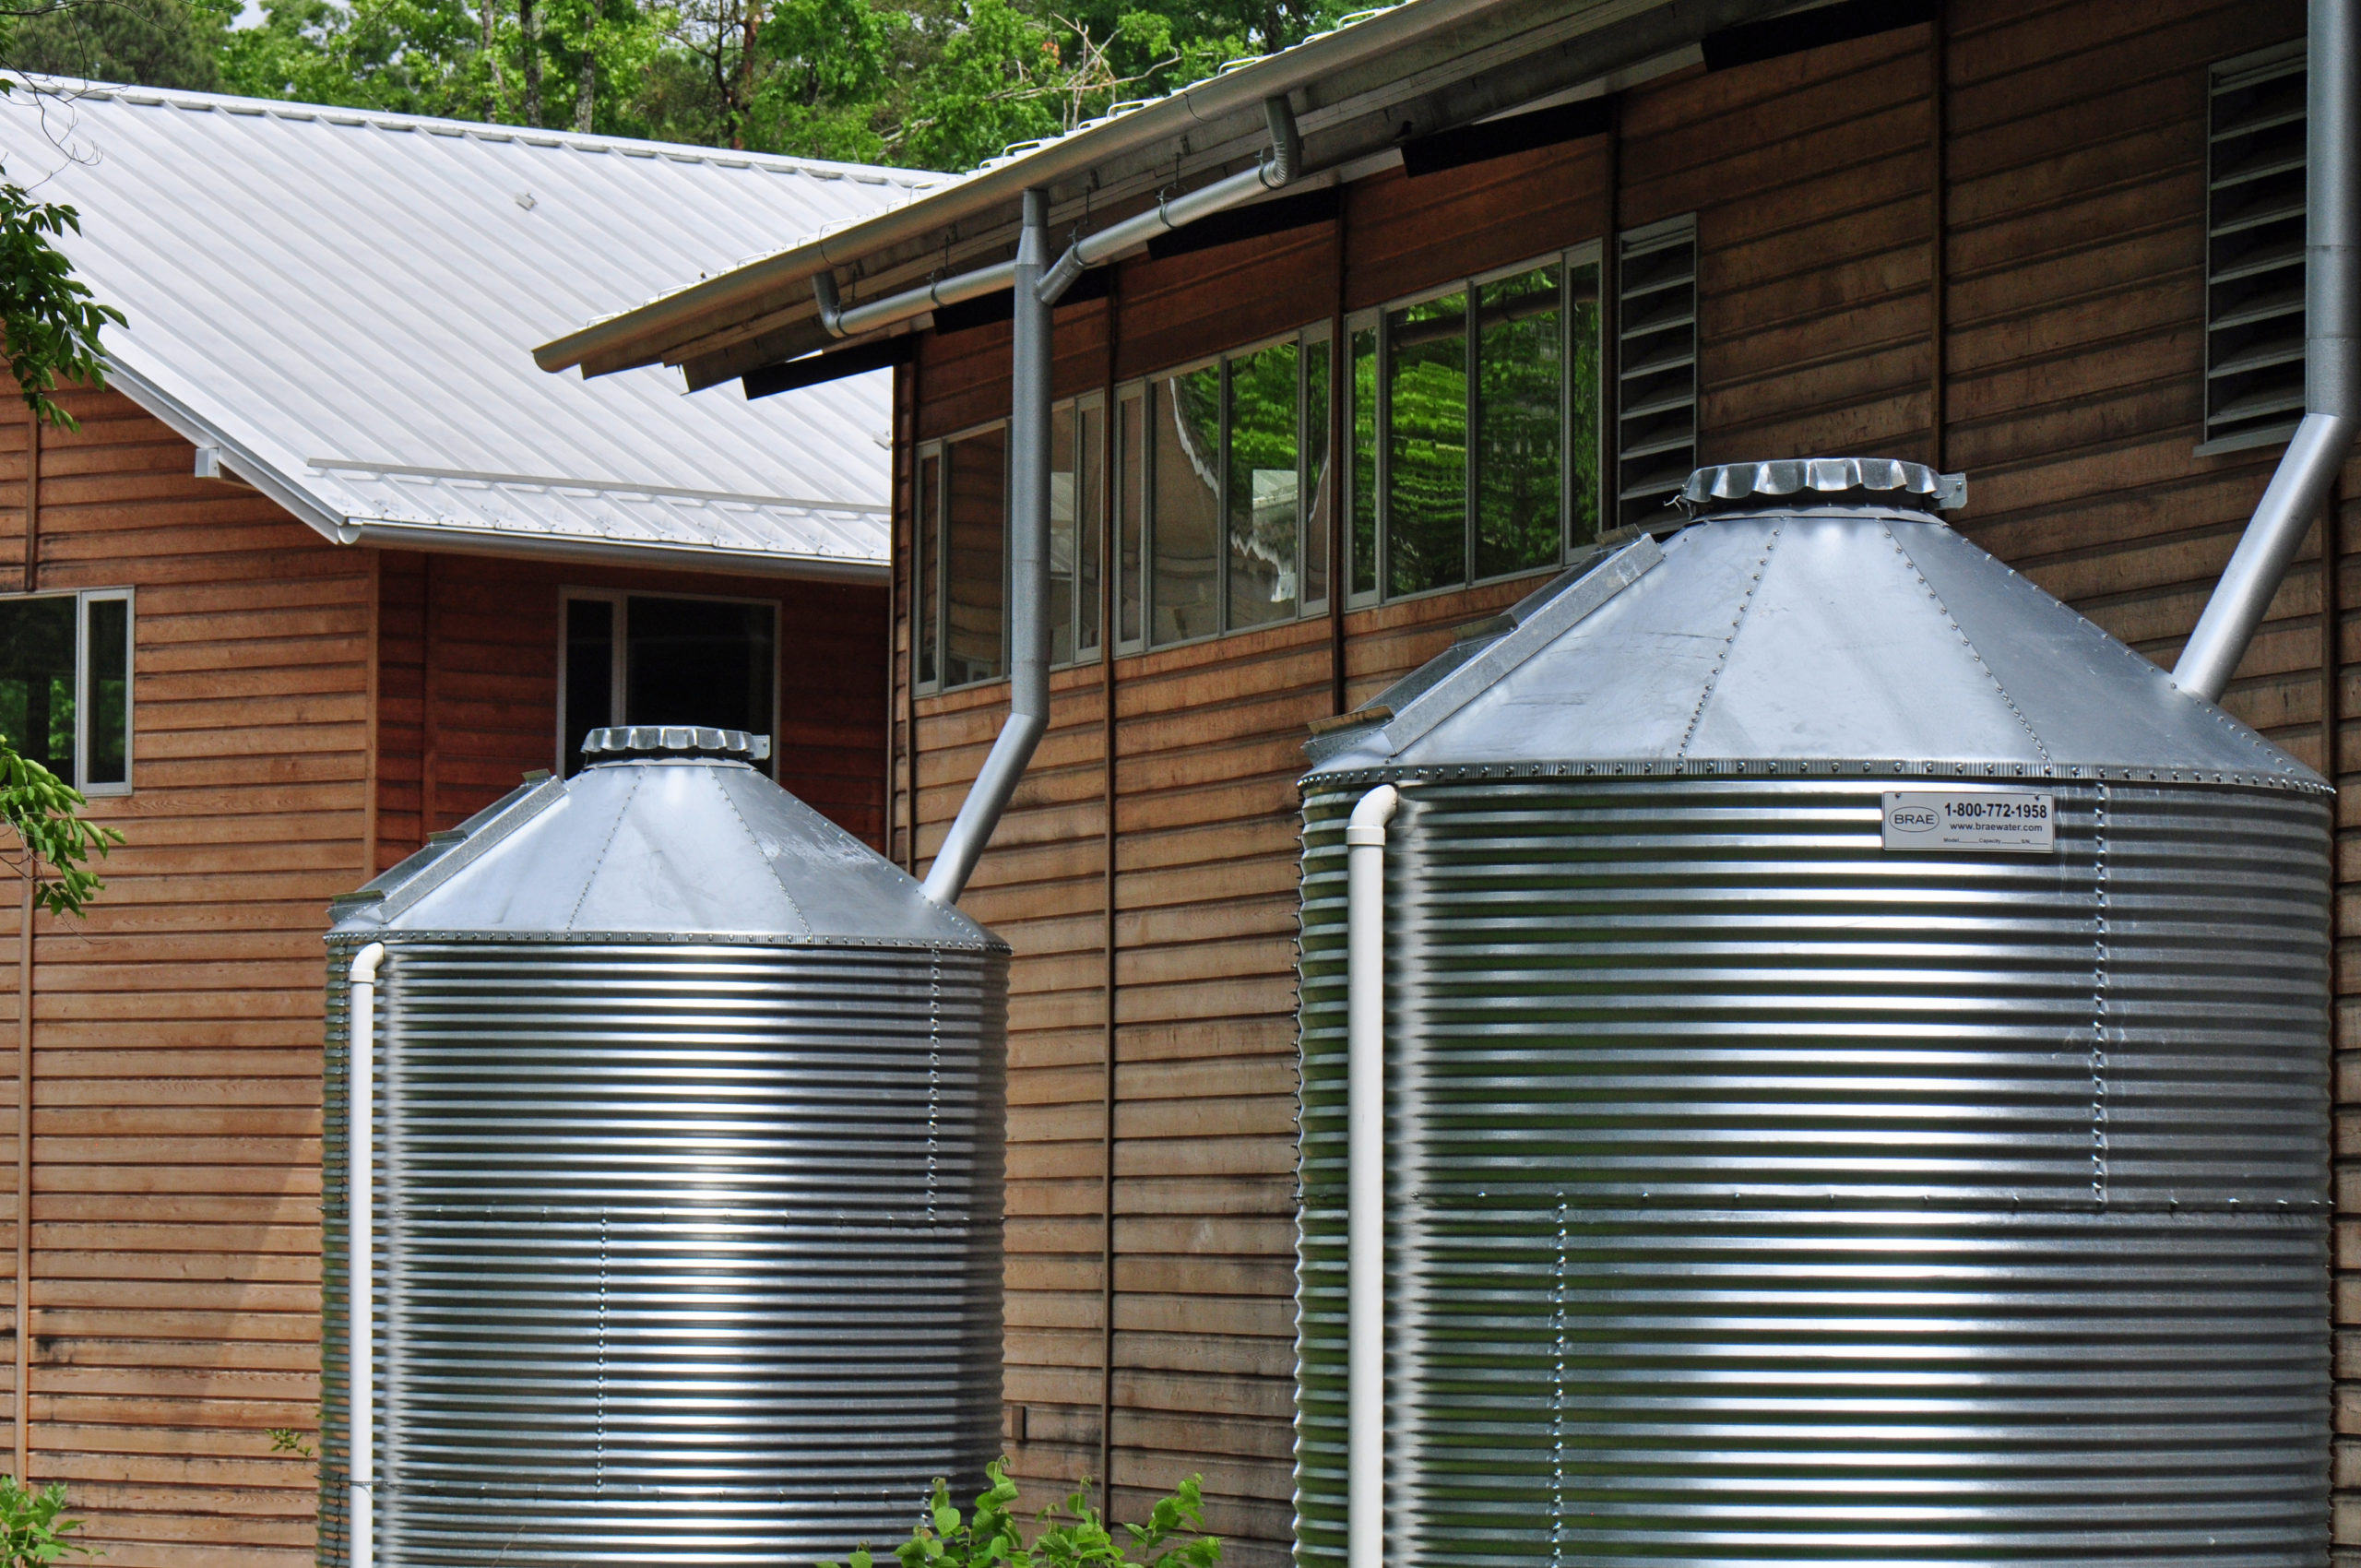 A rainwater drum collection system, consisting of large barrels or containers designed to capture and store rainwater for various eco-friendly purposes such as irrigation and conservation.